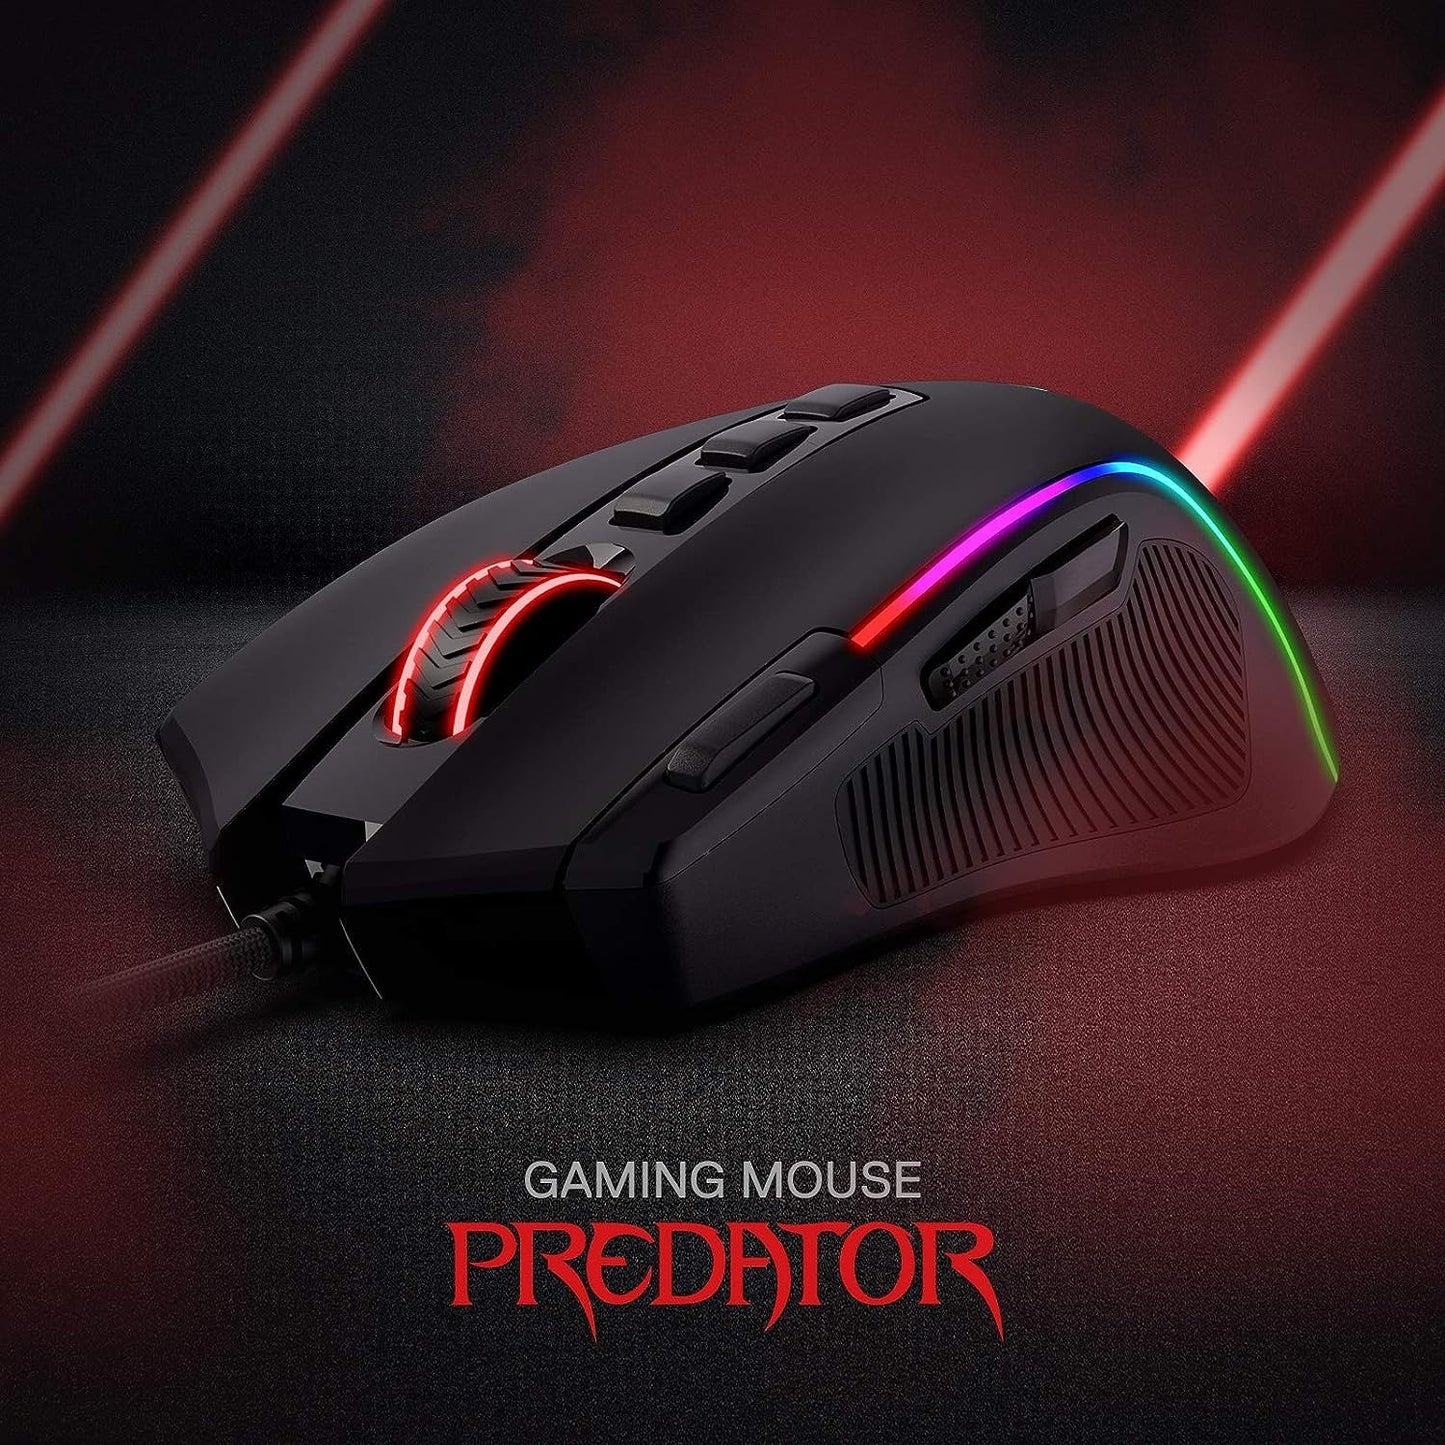 Redragon M612 Predator RGB Optical USB Wired Gaming Mouse with Up to 8000 DPI, Pentakill 5 DPI Levels, 5 Backlit Modes,11 Programmable Buttons, Software Supports DIY Key binds Rapid Fire Button